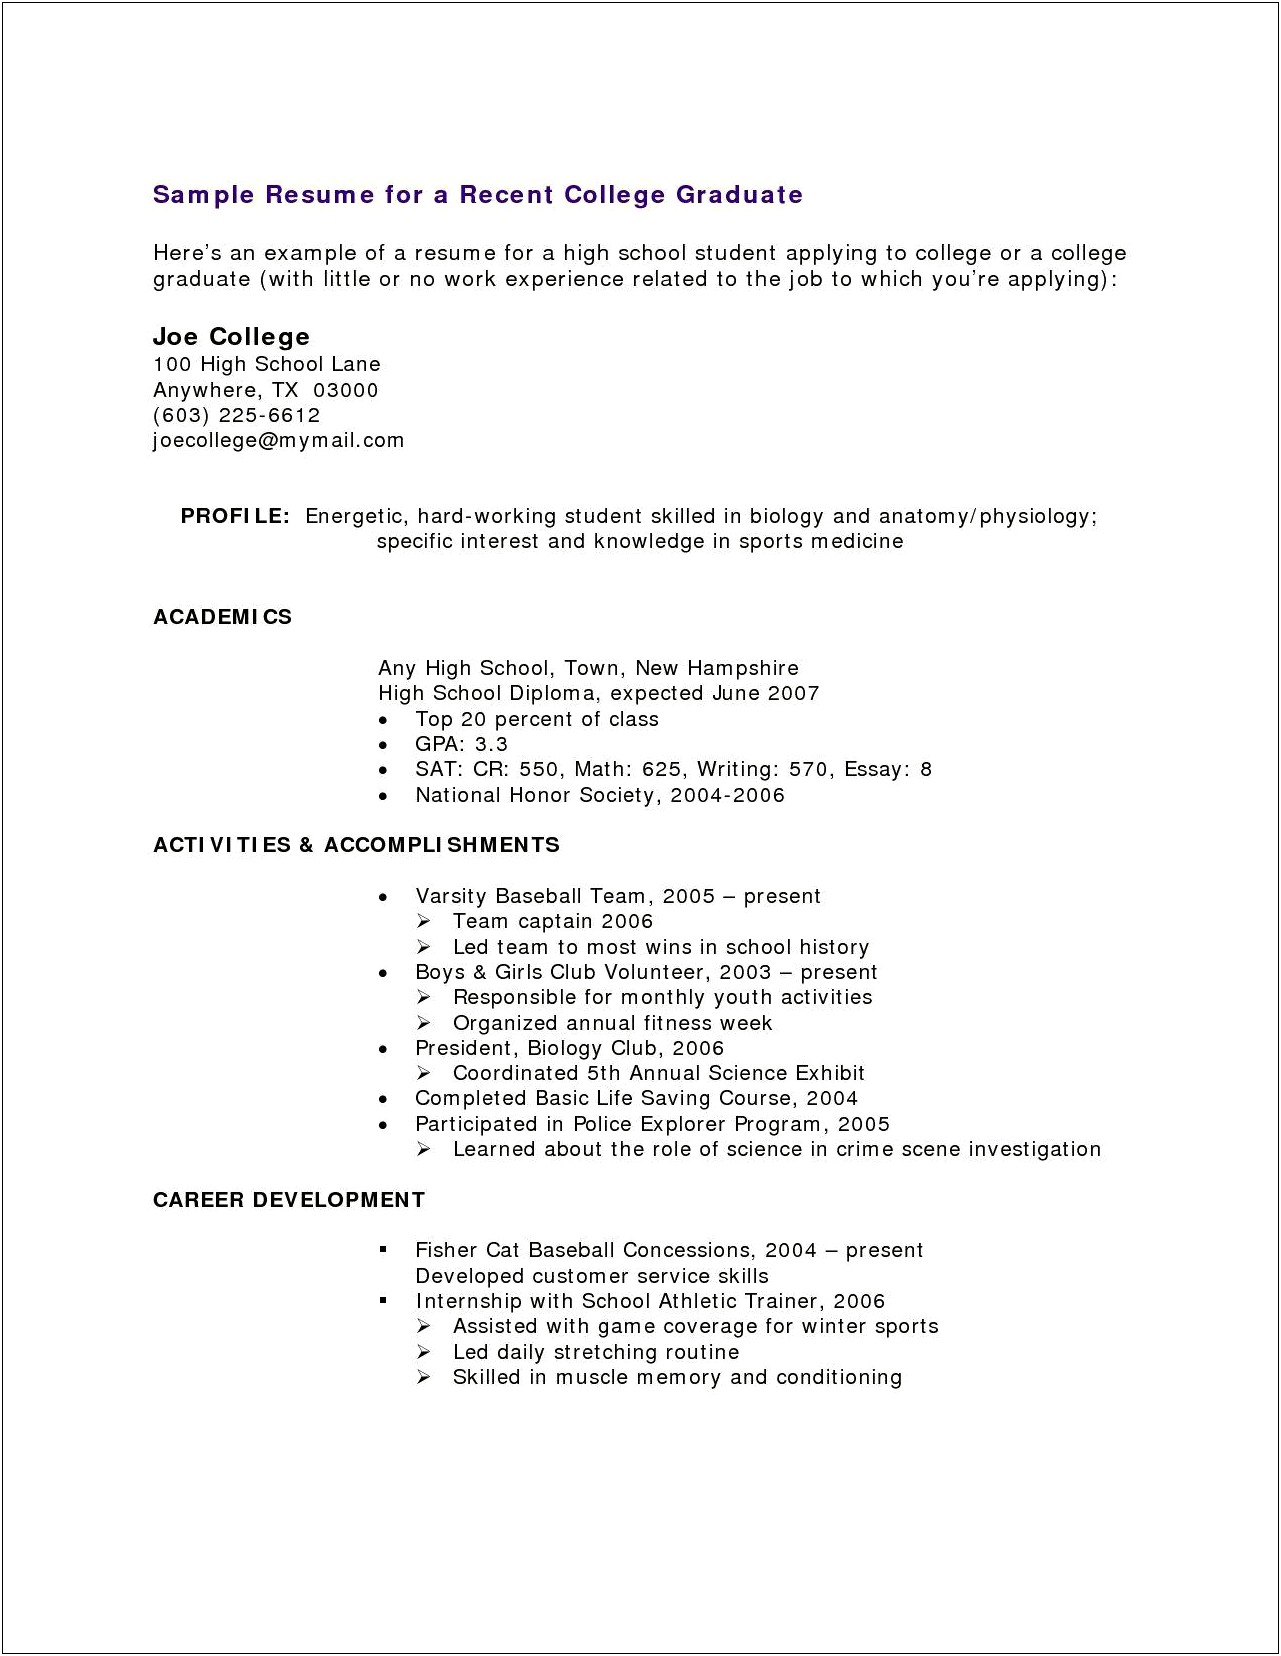 Sample Resume For College Graduates With No Experience